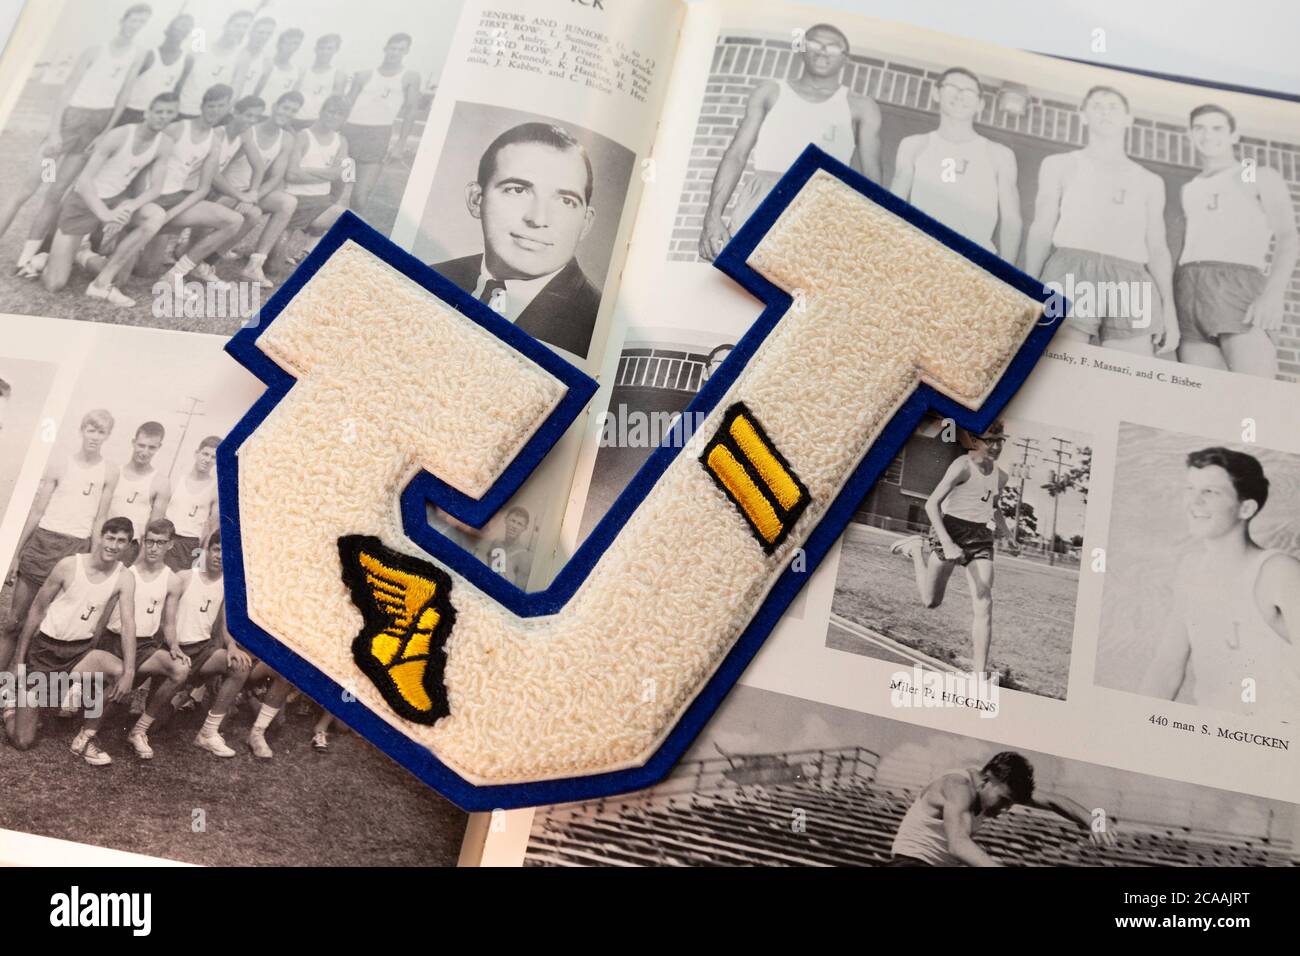 Still Life 1960s High School Athletic Letter on Class Yearbook, USA Stockfoto